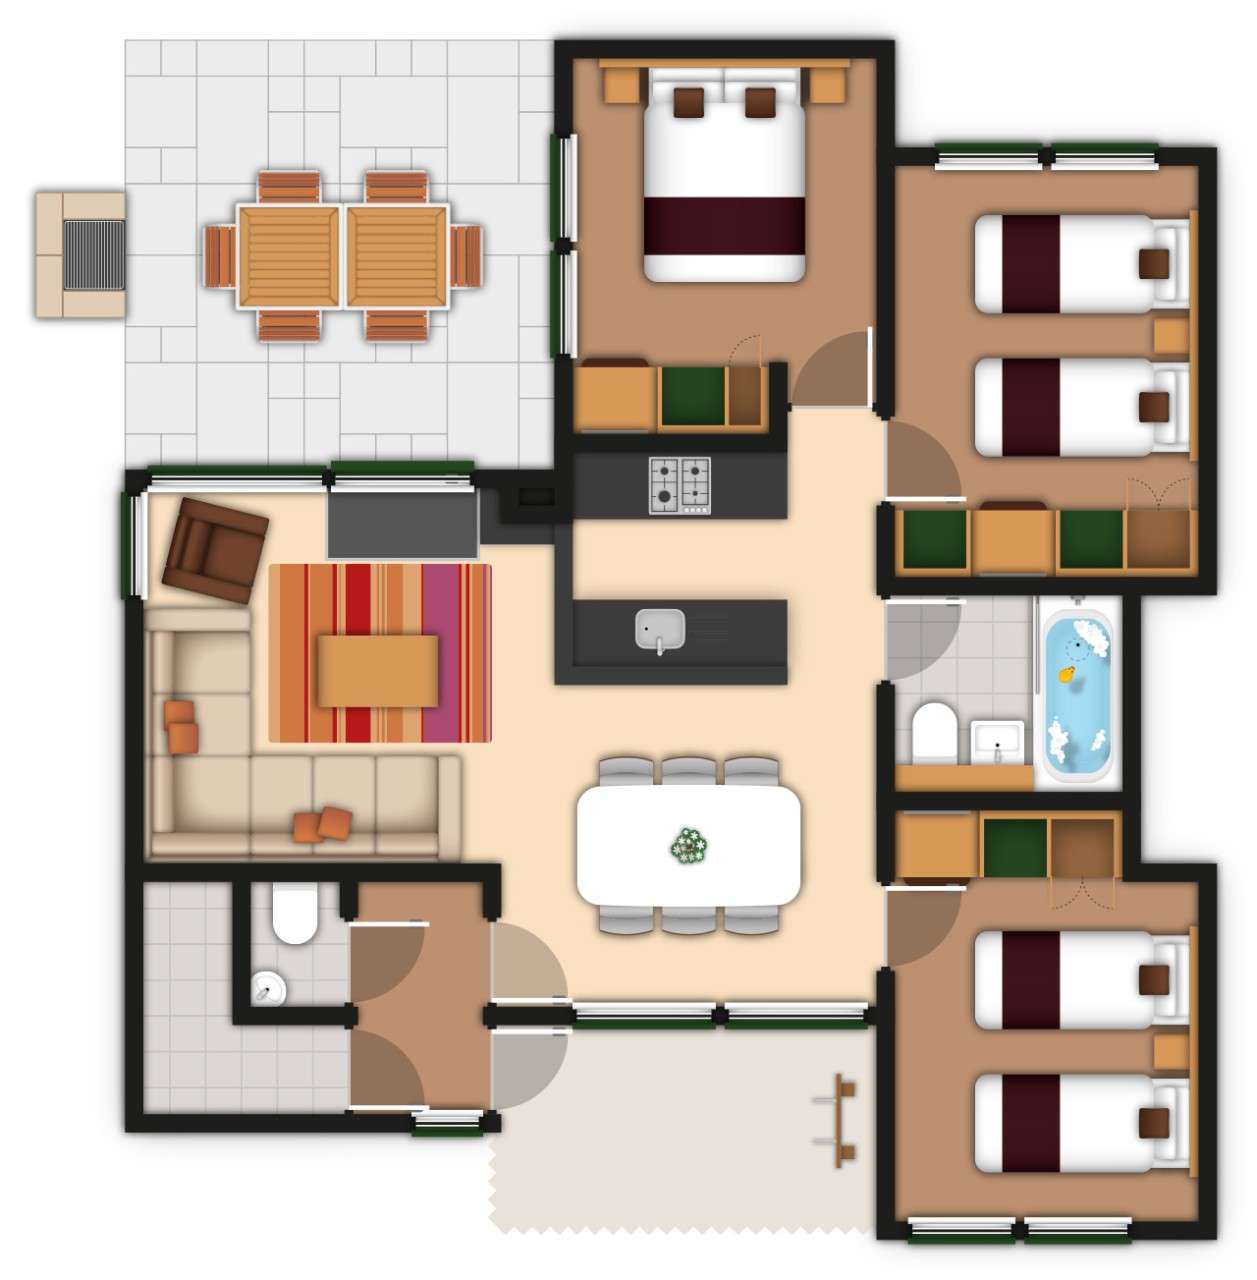 A detailed floor plan illustration of a three bedroom Woodland Lodge. If you require further assistance viewing the floor plan or need further information please contact Guest Services.